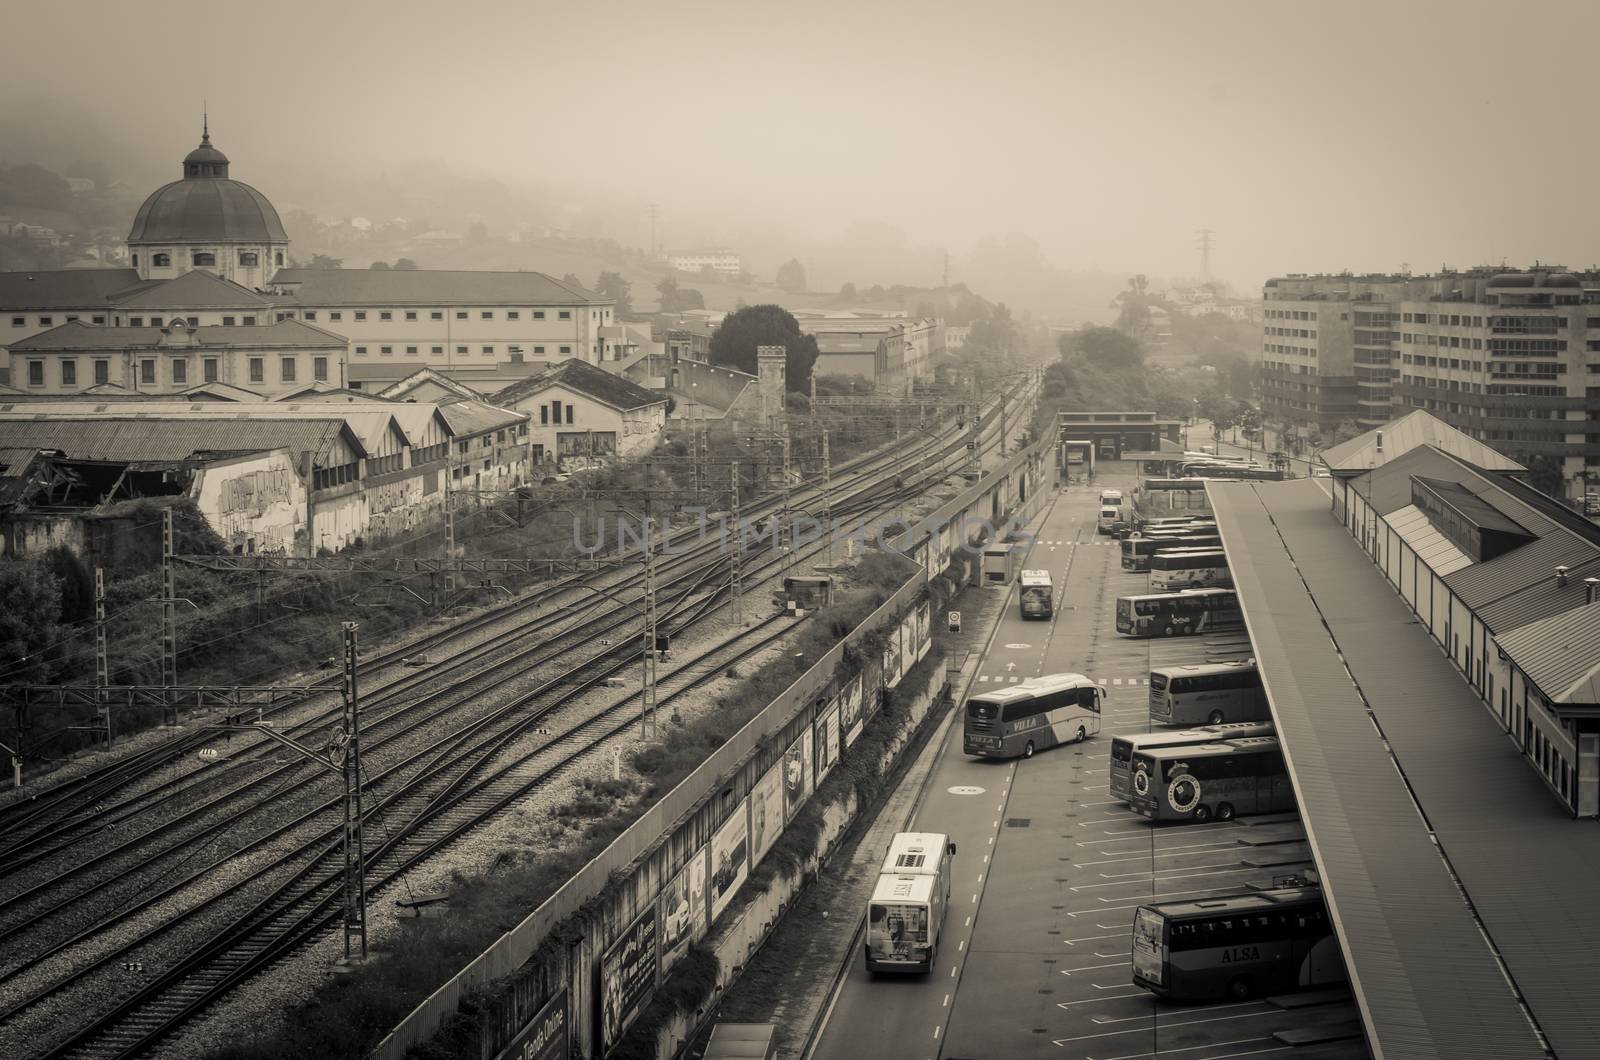 Some buses at the bus station and the train tracks carry the viewer to the old better times in Oviedo, Asturias, Spain